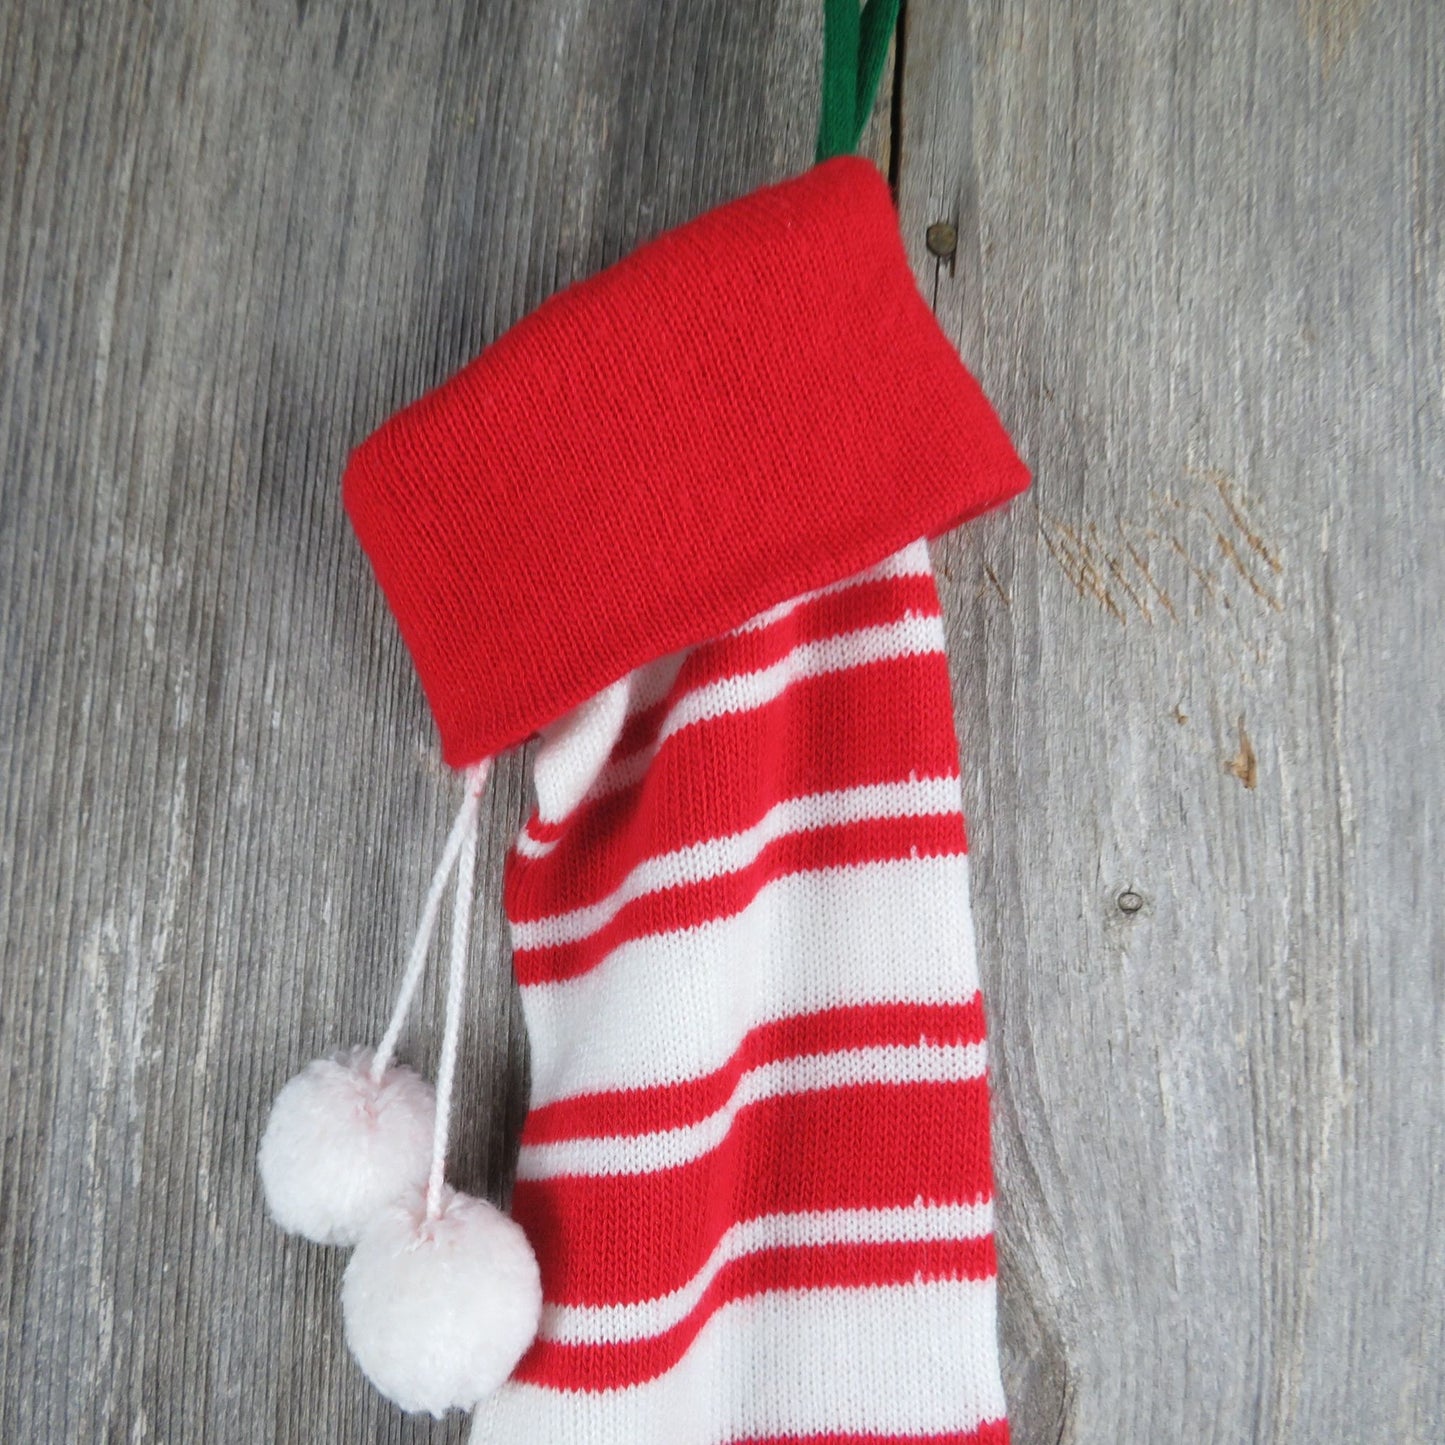 Vintage Candy Cane Striped Stocking Red White Knit Kurt Adler 1983 Christmas Knitted ST361